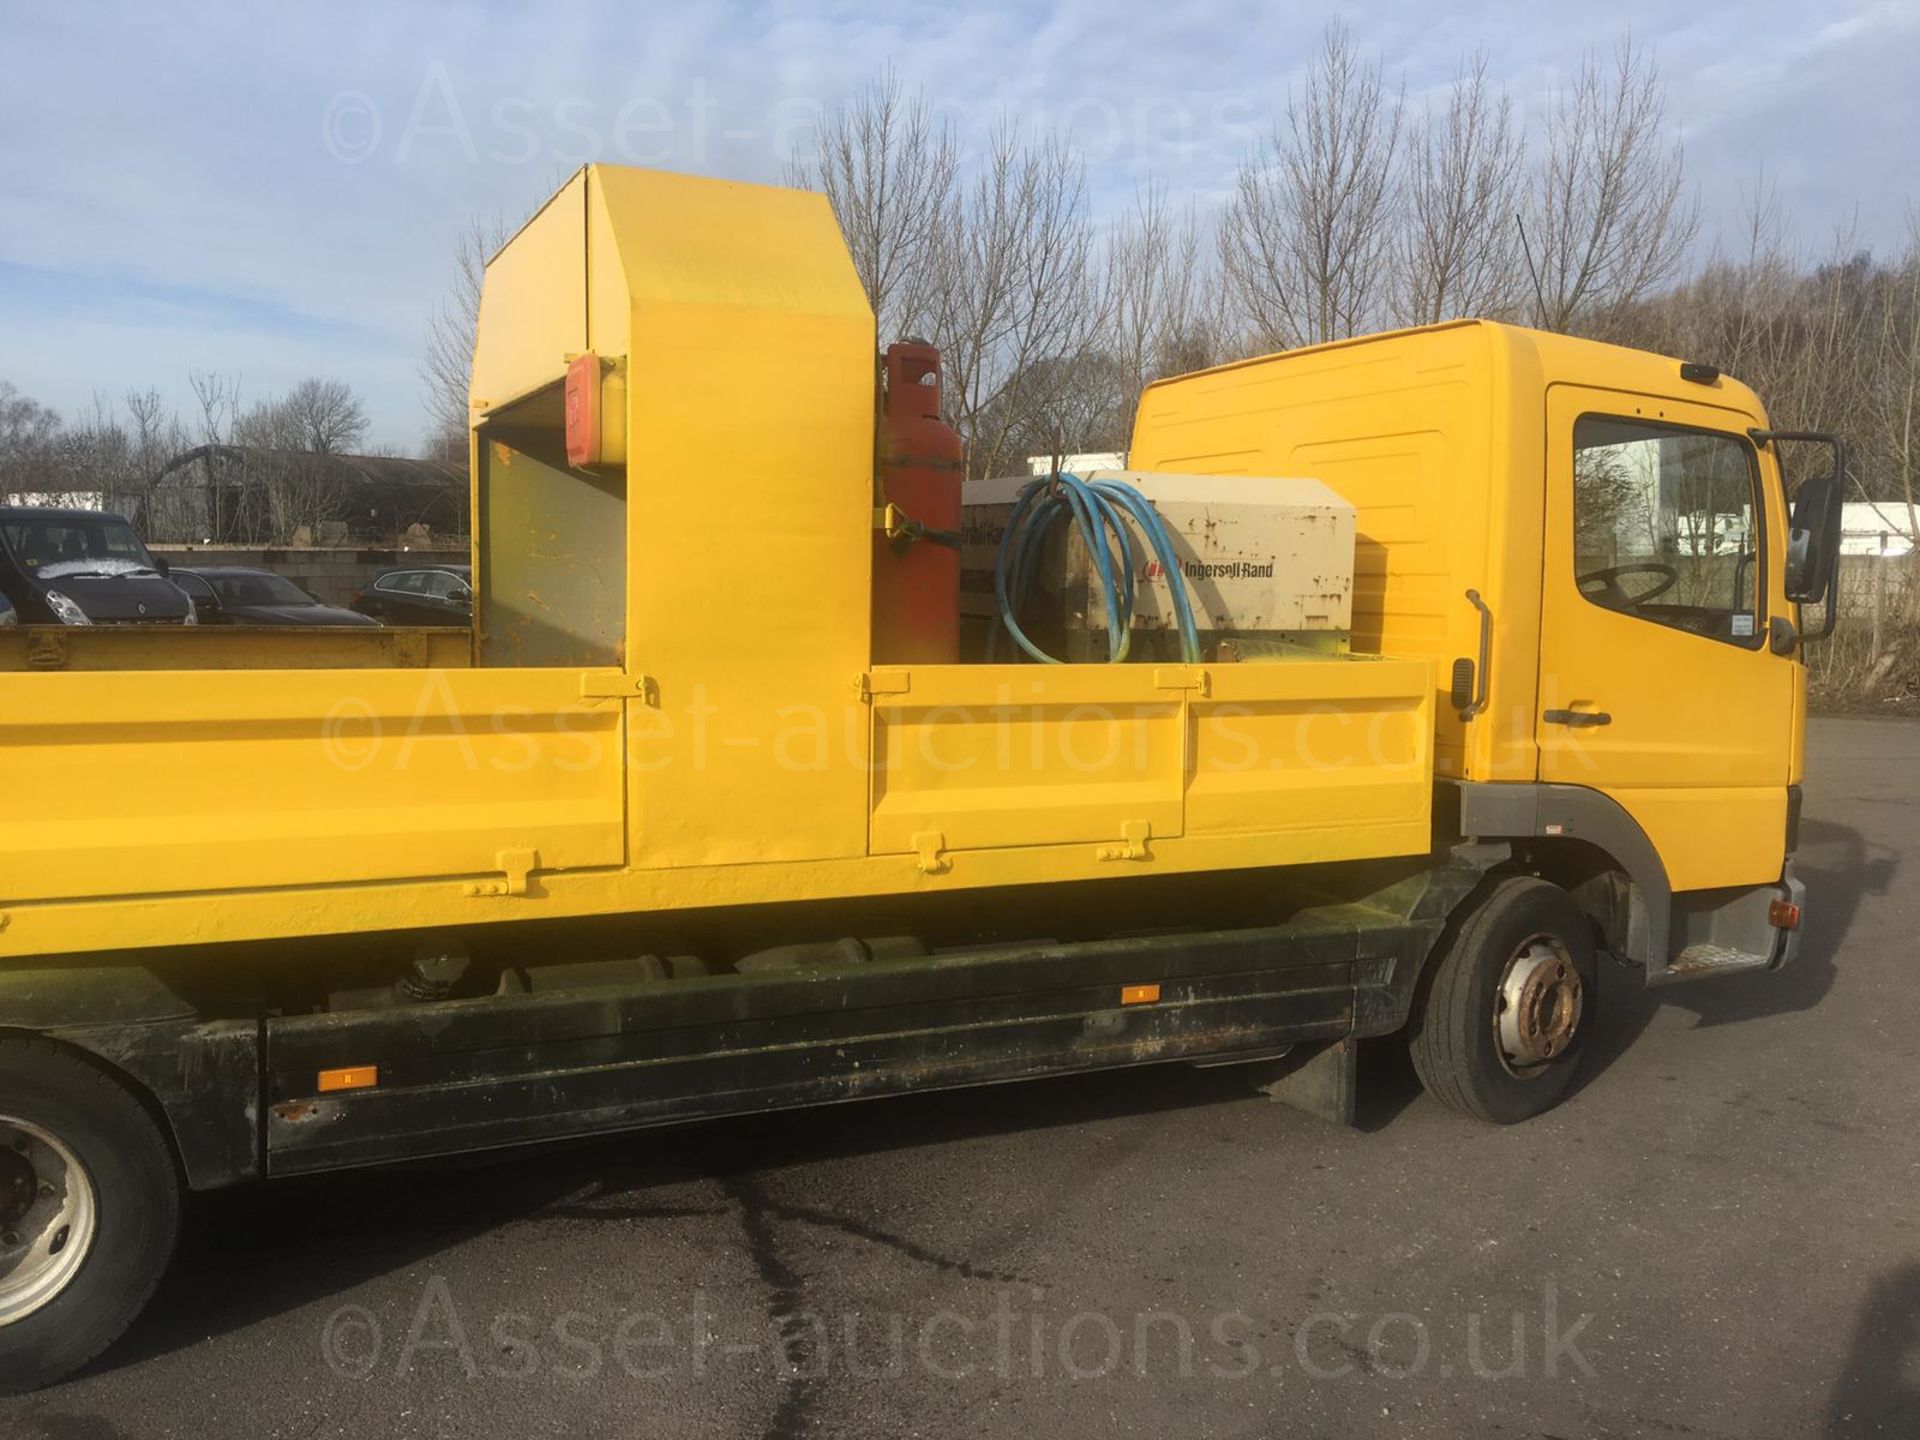 2004/54 REG MERCEDES ATEGO 1018 DAY YELLOW DROPSIDE LINE PAINTING LORRY 4.3L DIESEL ENGINE *NO VAT* - Image 10 of 62